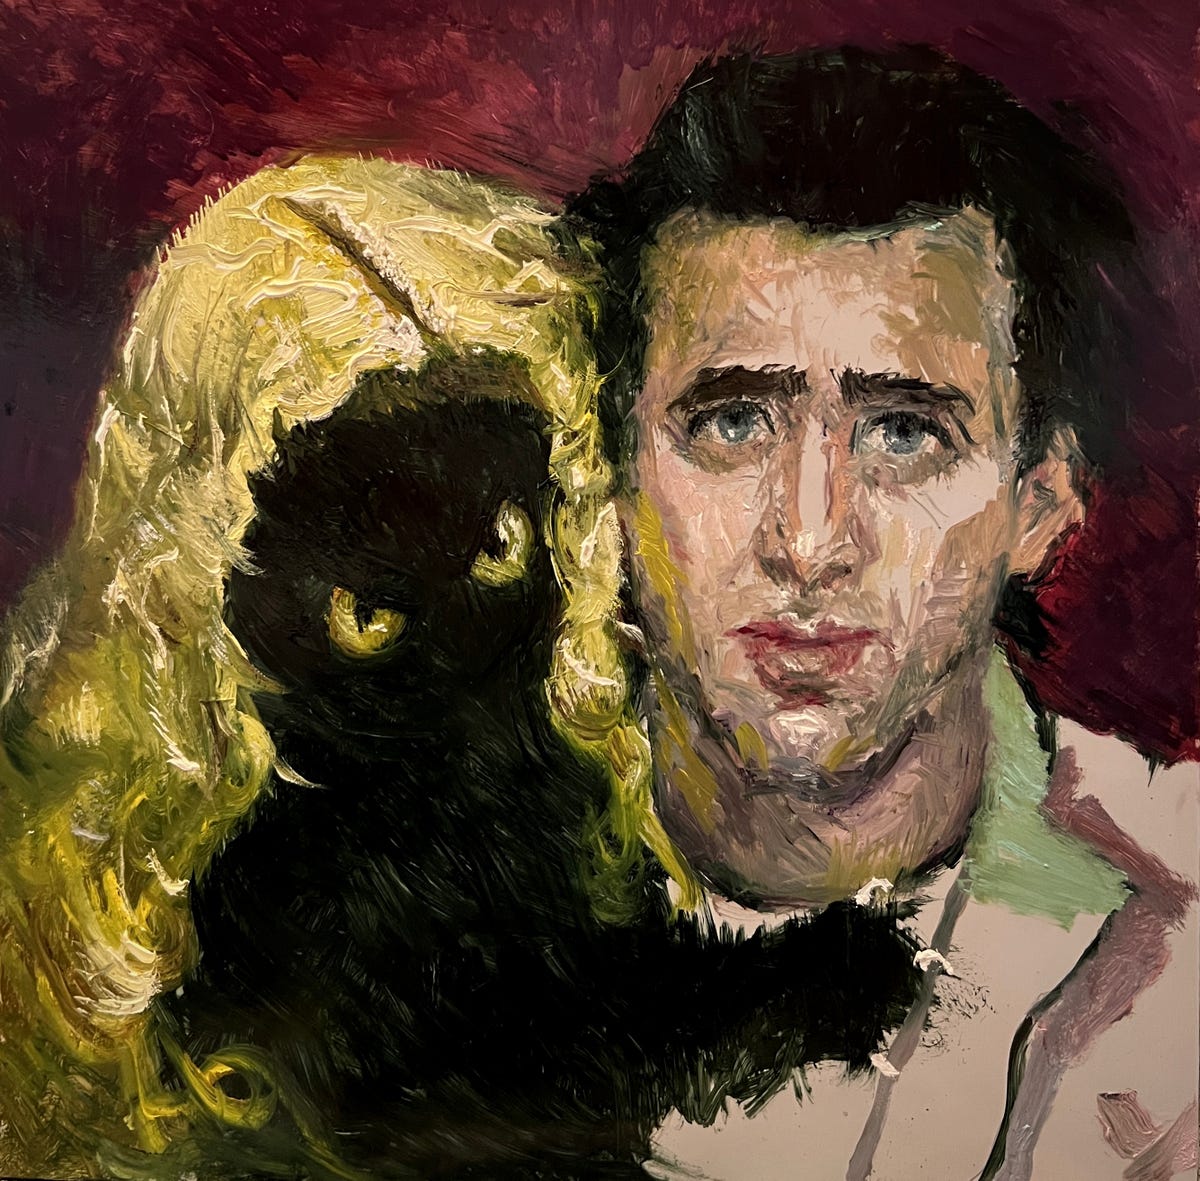 The oil painting Wild at Art shows Nic Cage embraced by a yellow-eyed black cat